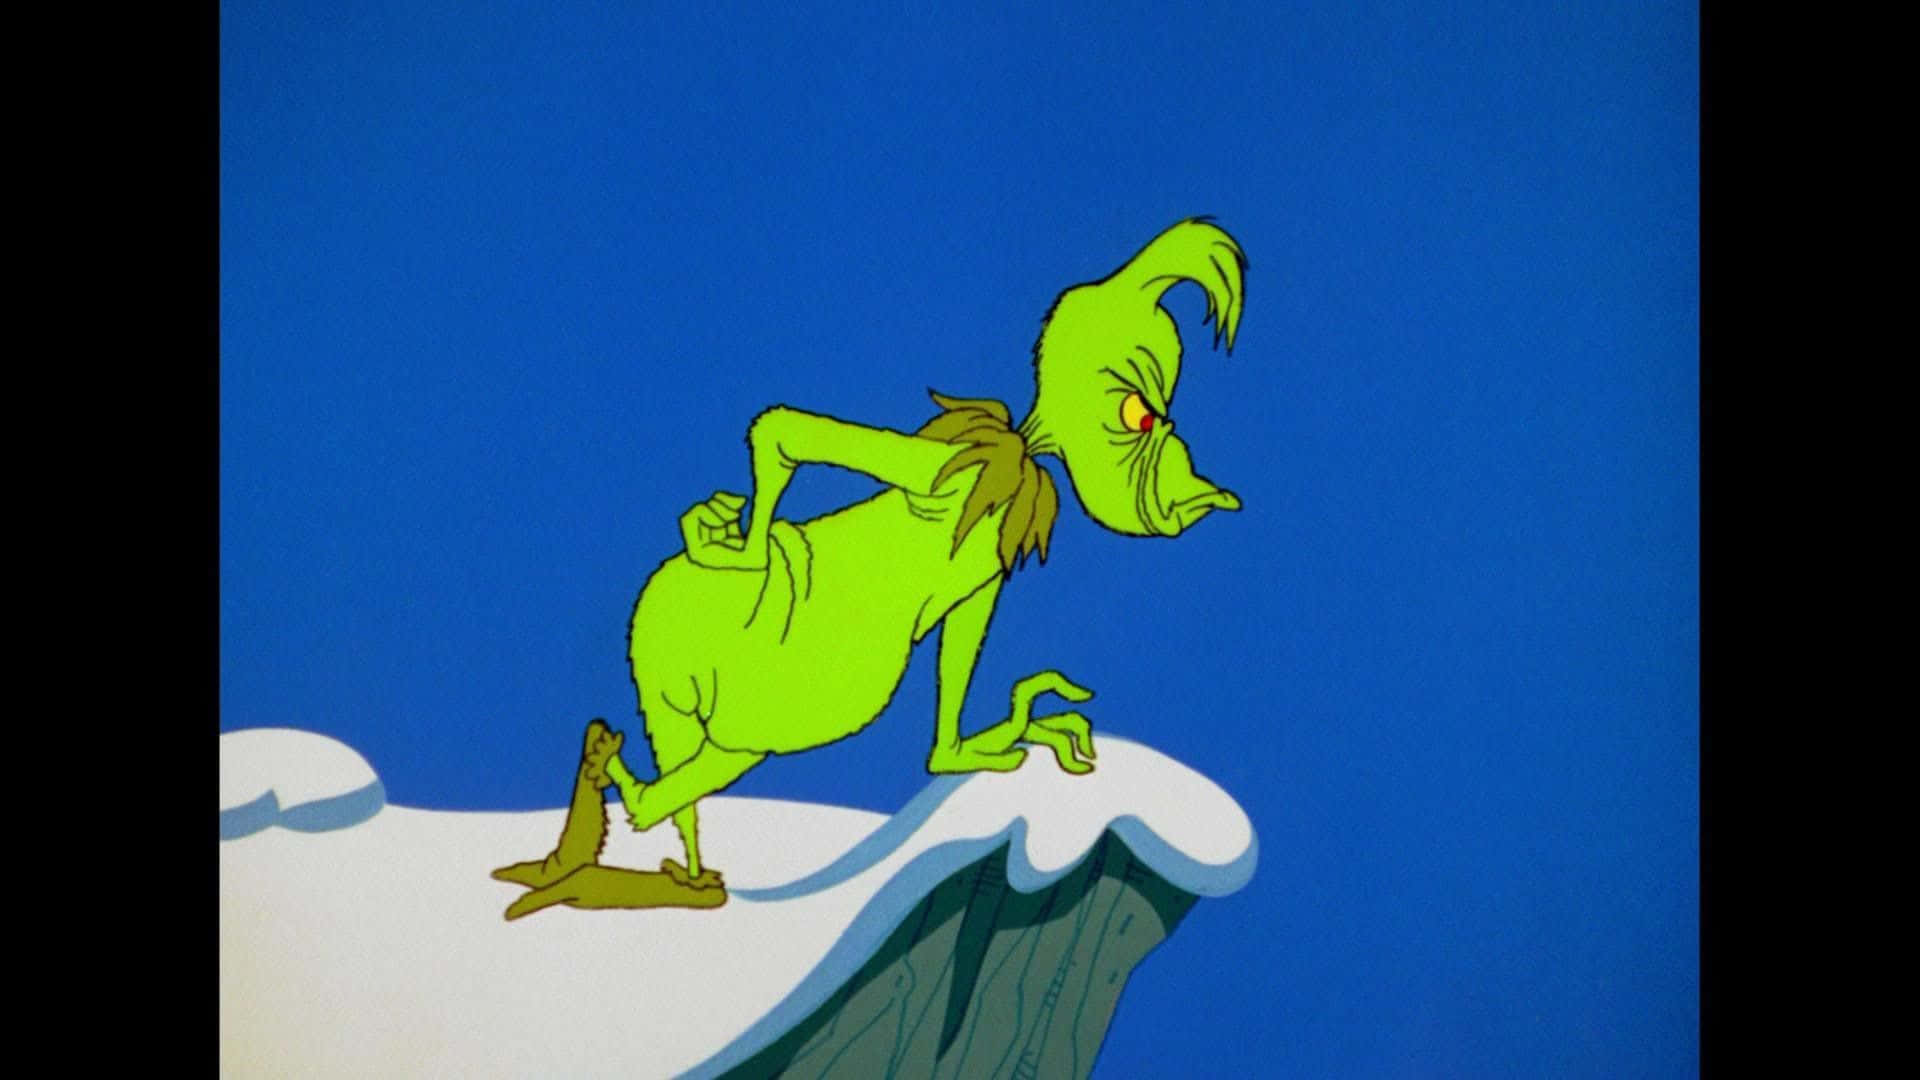 The Grinch In The Snow Background